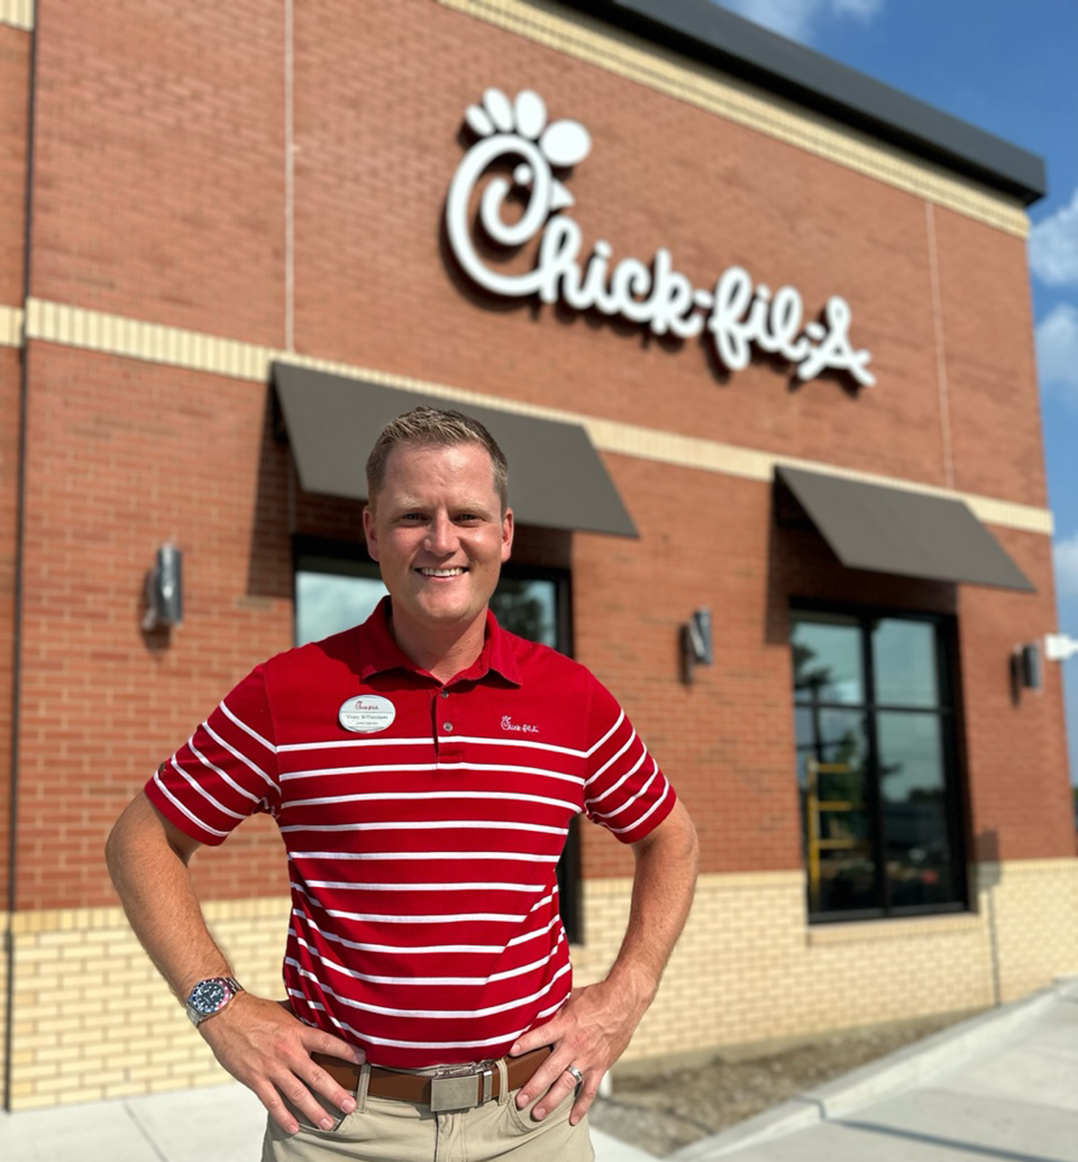 Zionsville resident eager to open first Chick-fil-A in Carmel